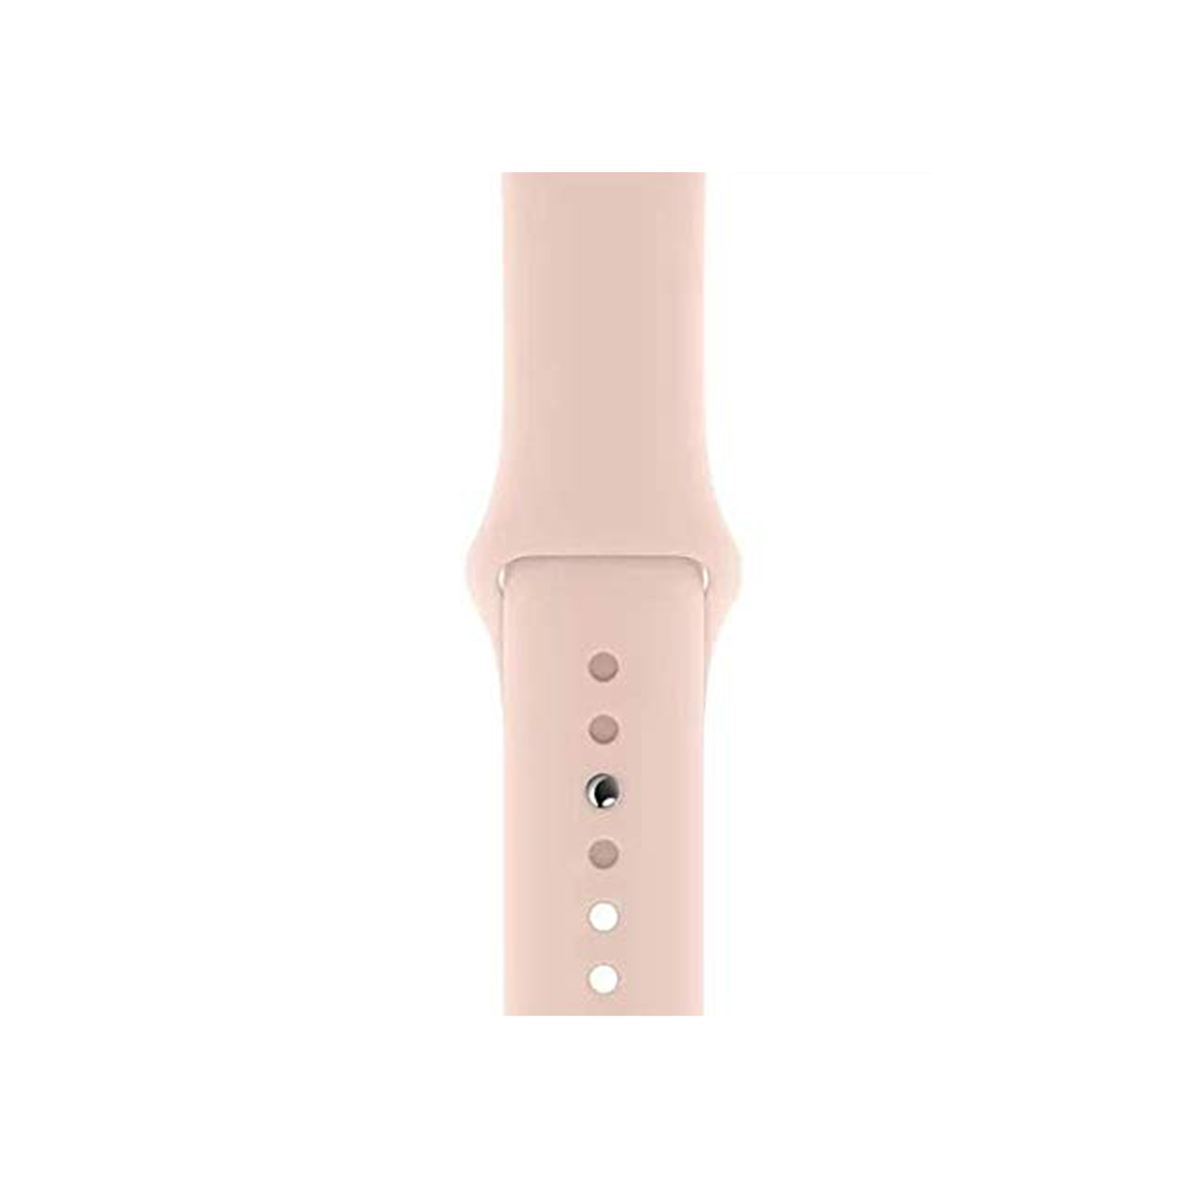 Apple Watch Series 5 GPS MWV72AE 40mm Gold Aluminium Case with Pink Sand Sport Band